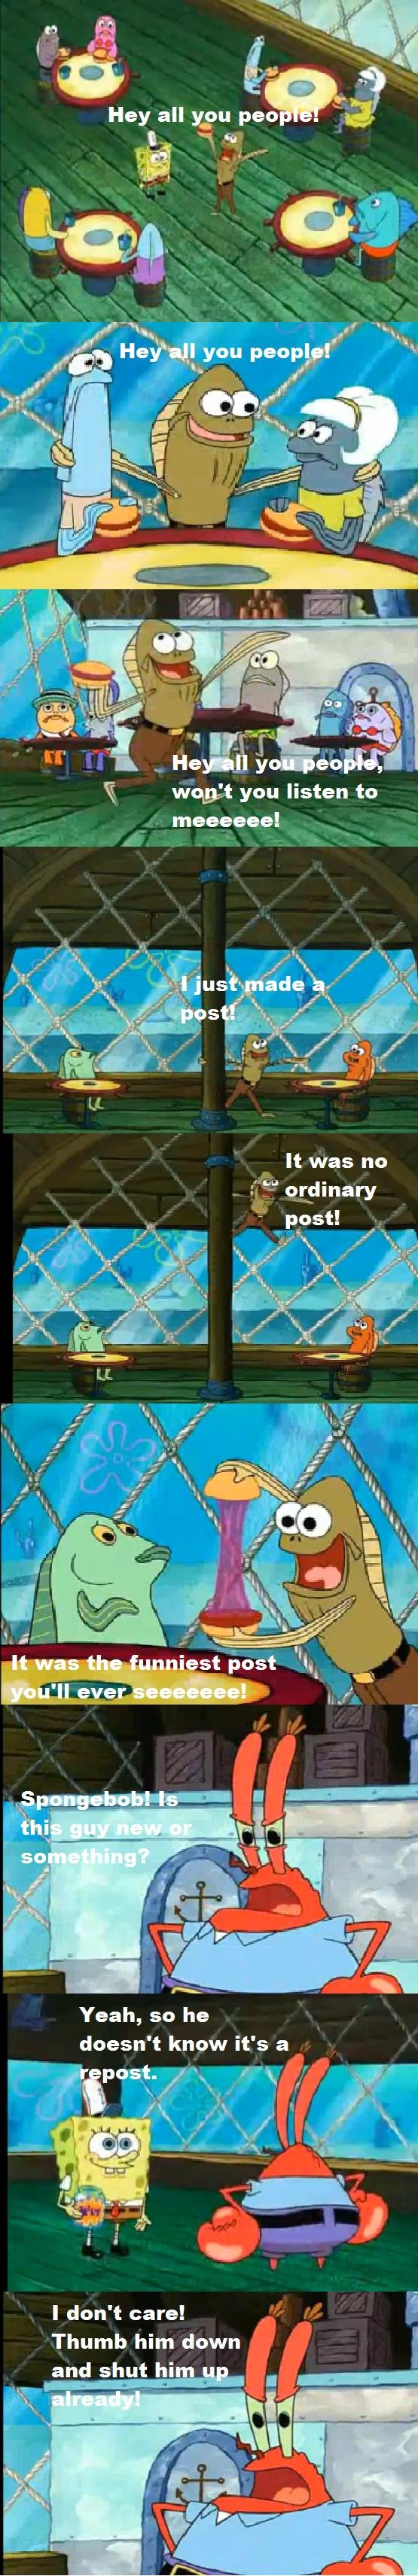 Spongebob on Reposts. I decided to re-upload this because it was destroyed when funnyjunk reverted back like three months a while ago and obliterated my account